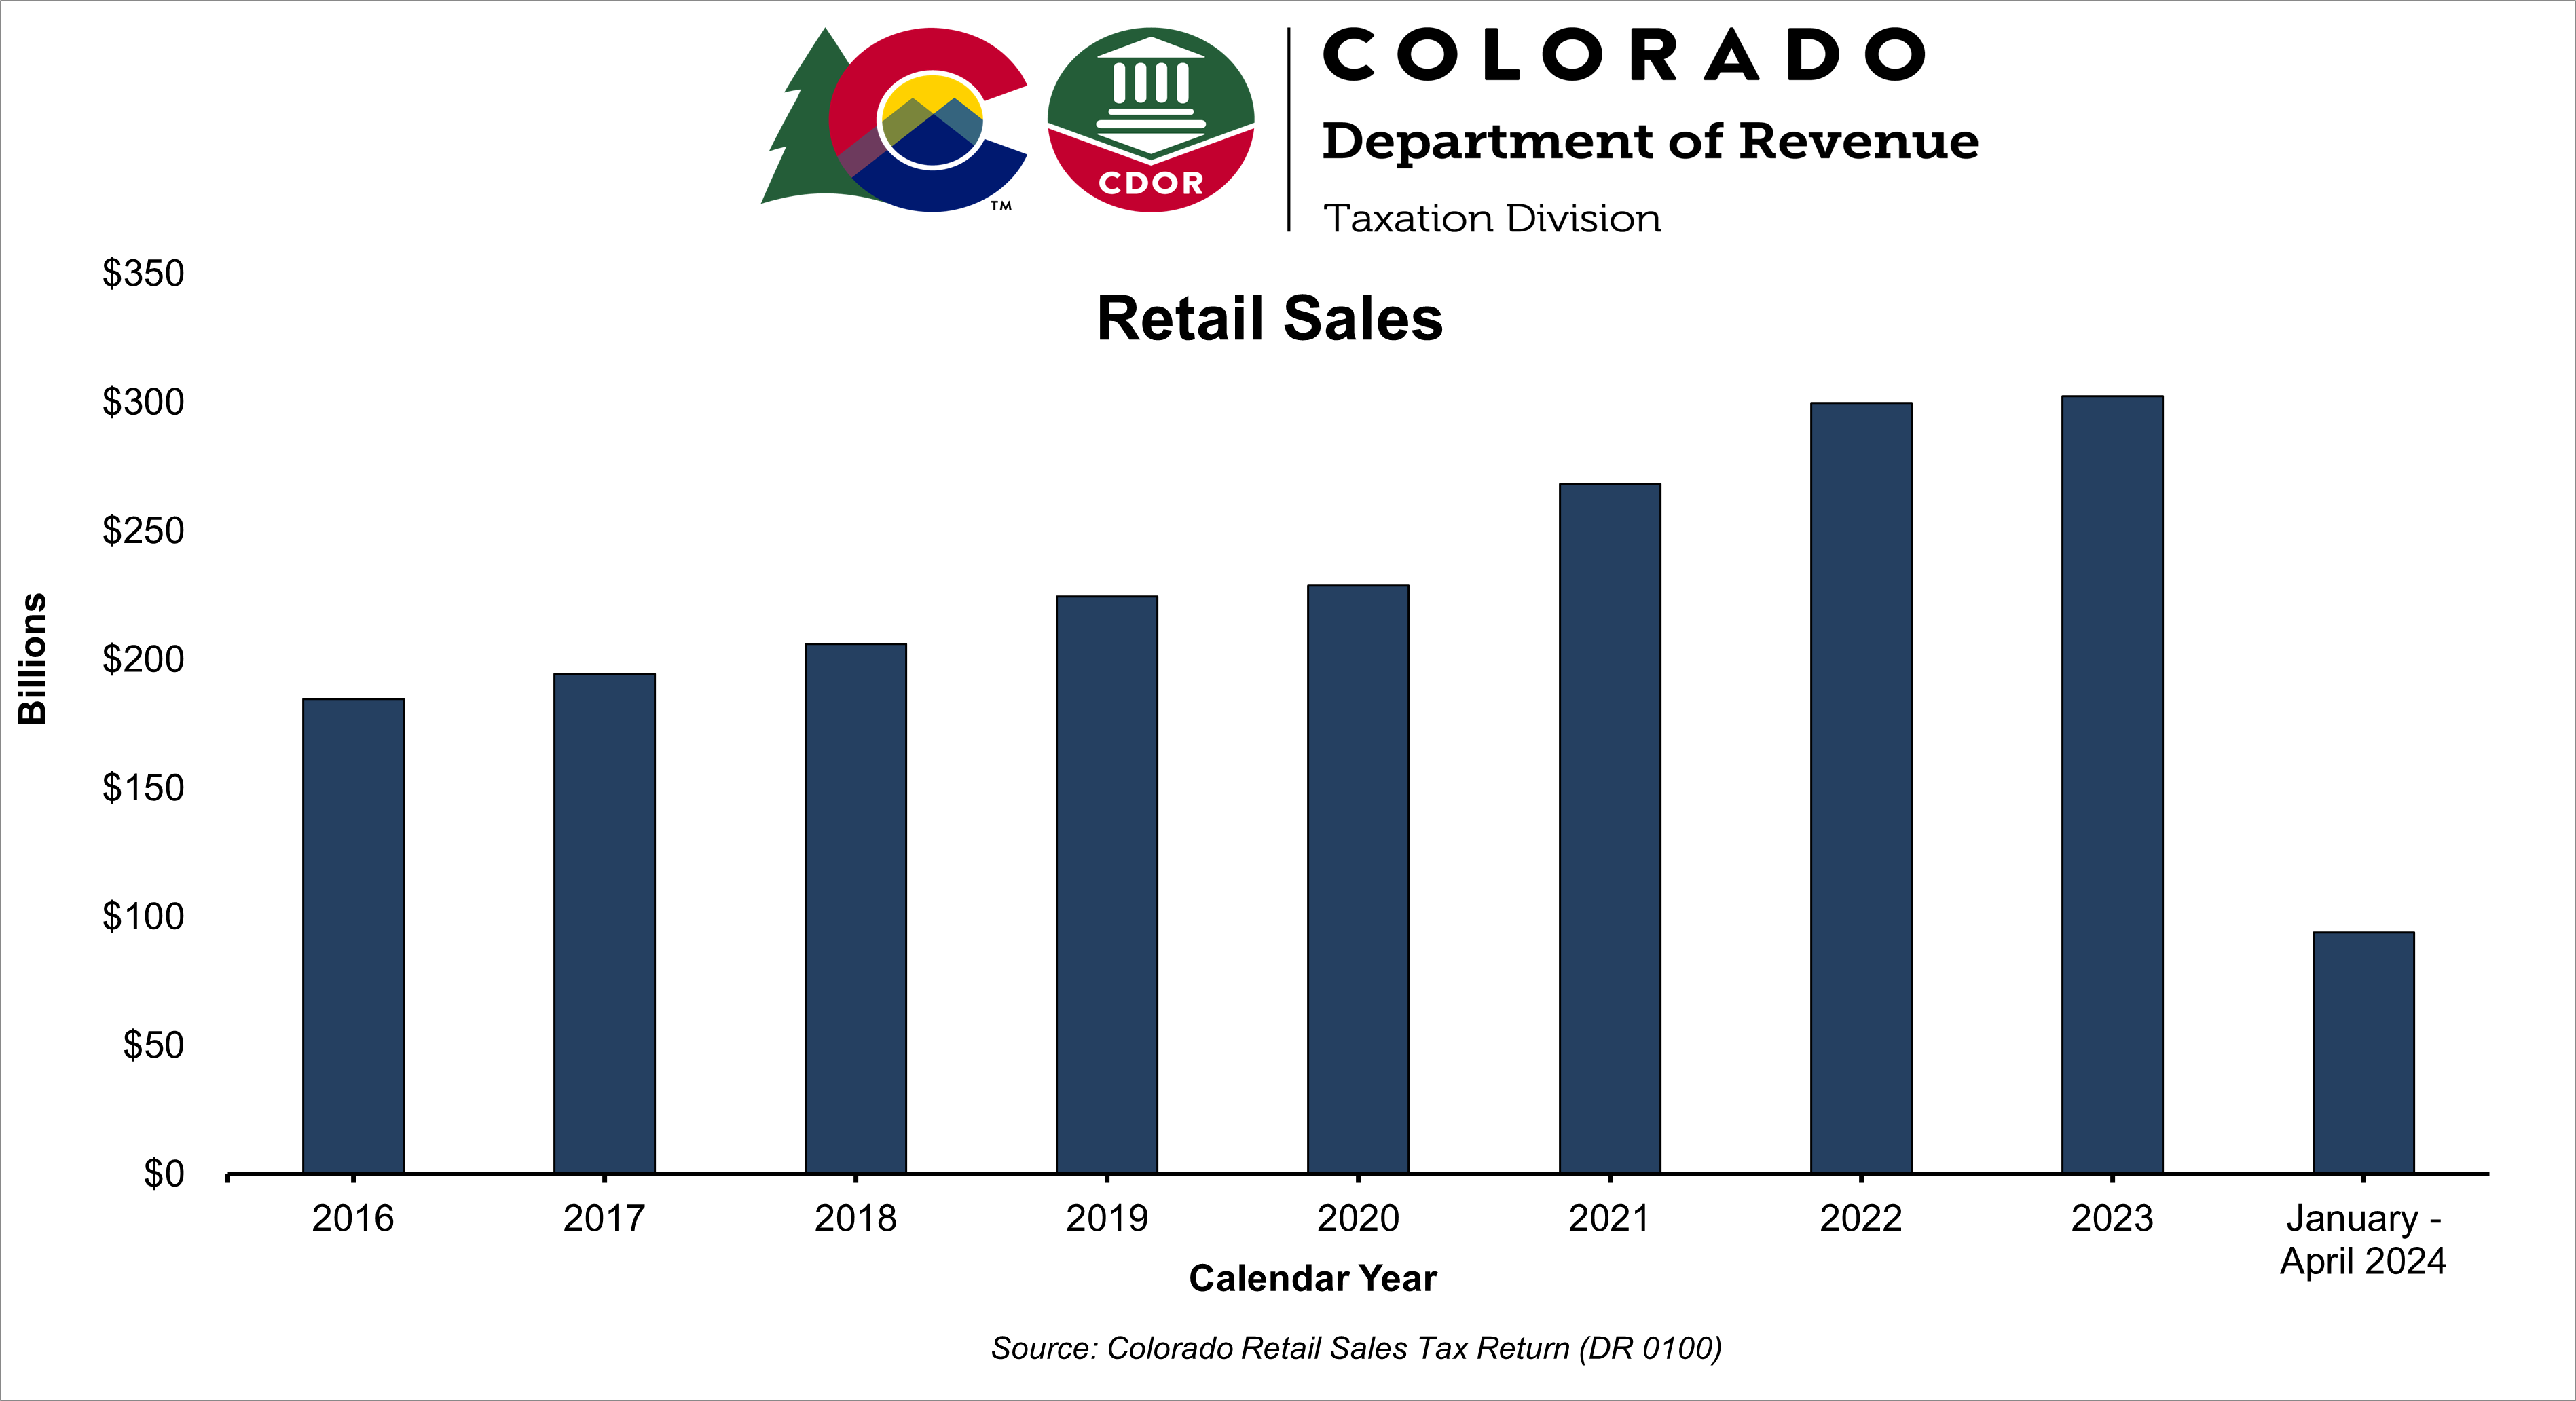 State retail sales from 2016 through 2024